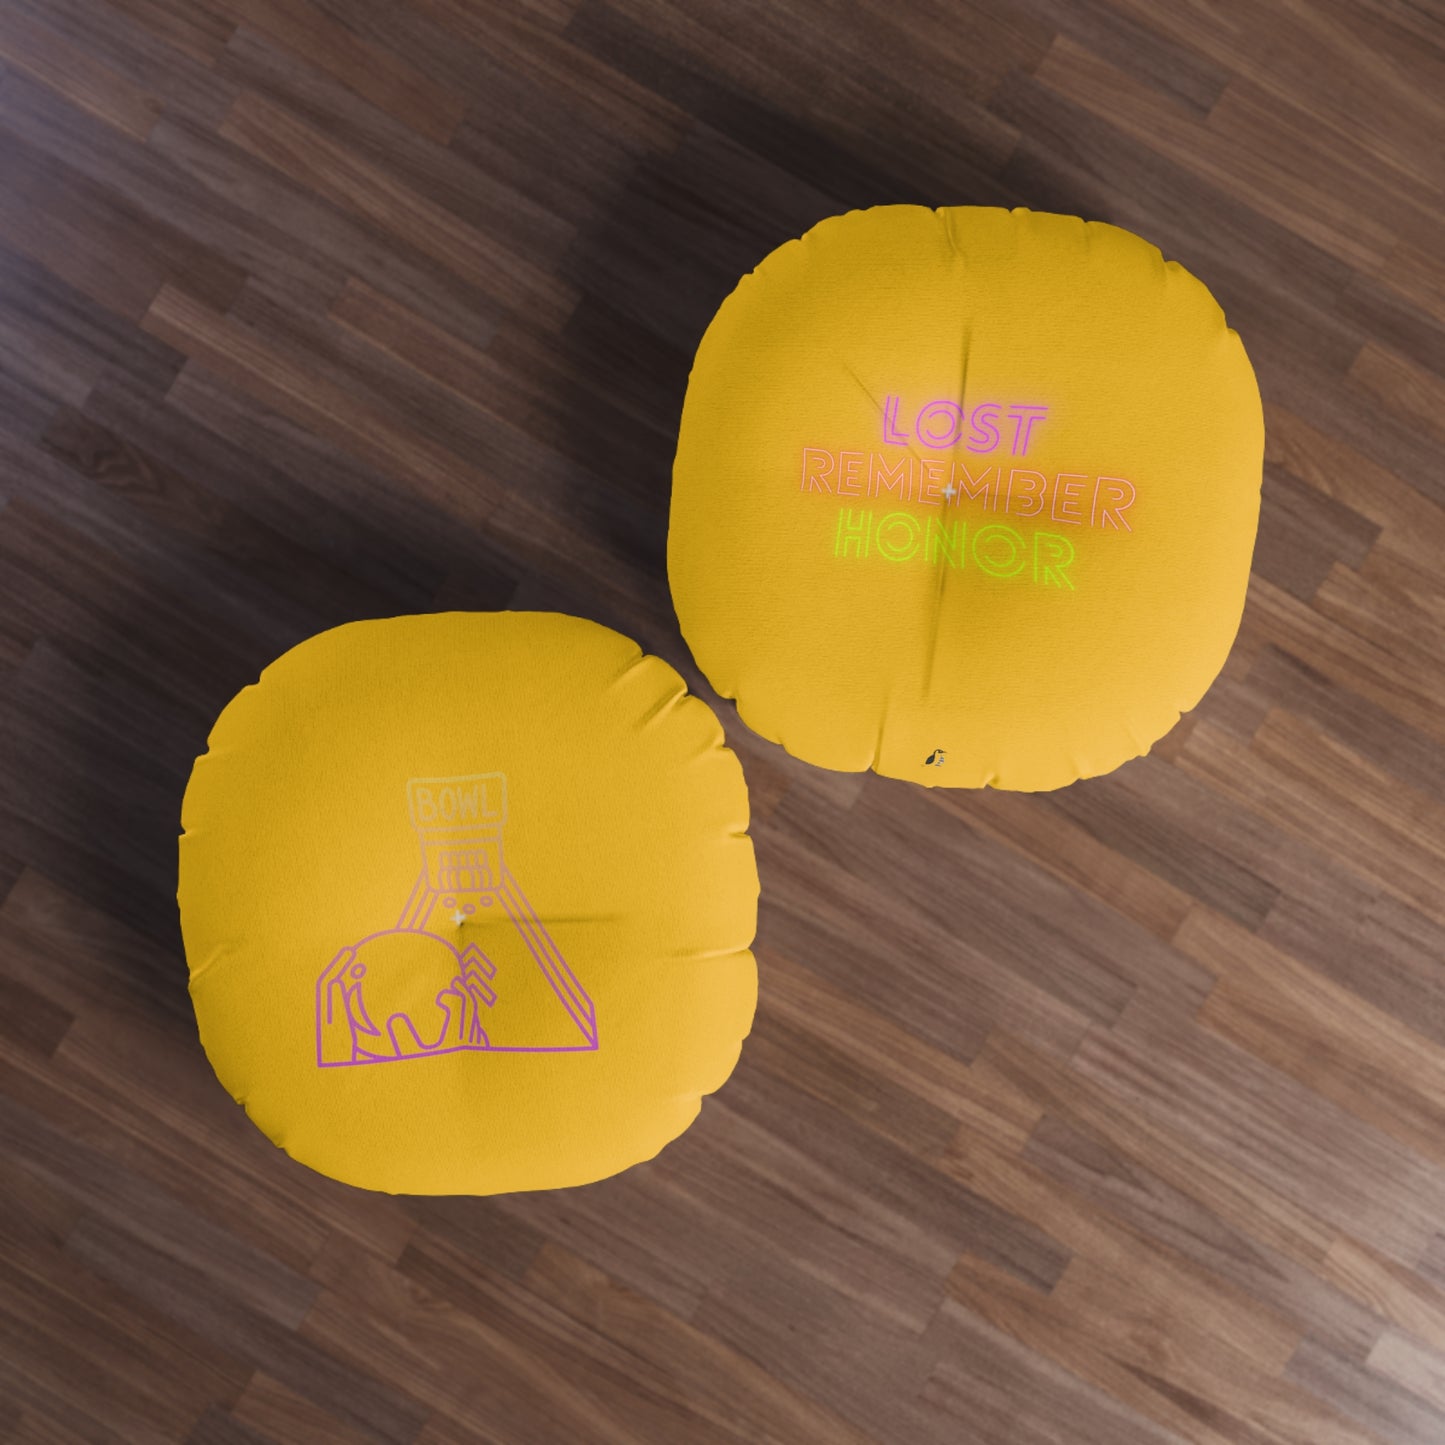 Tufted Floor Pillow, Round: Bowling Yellow